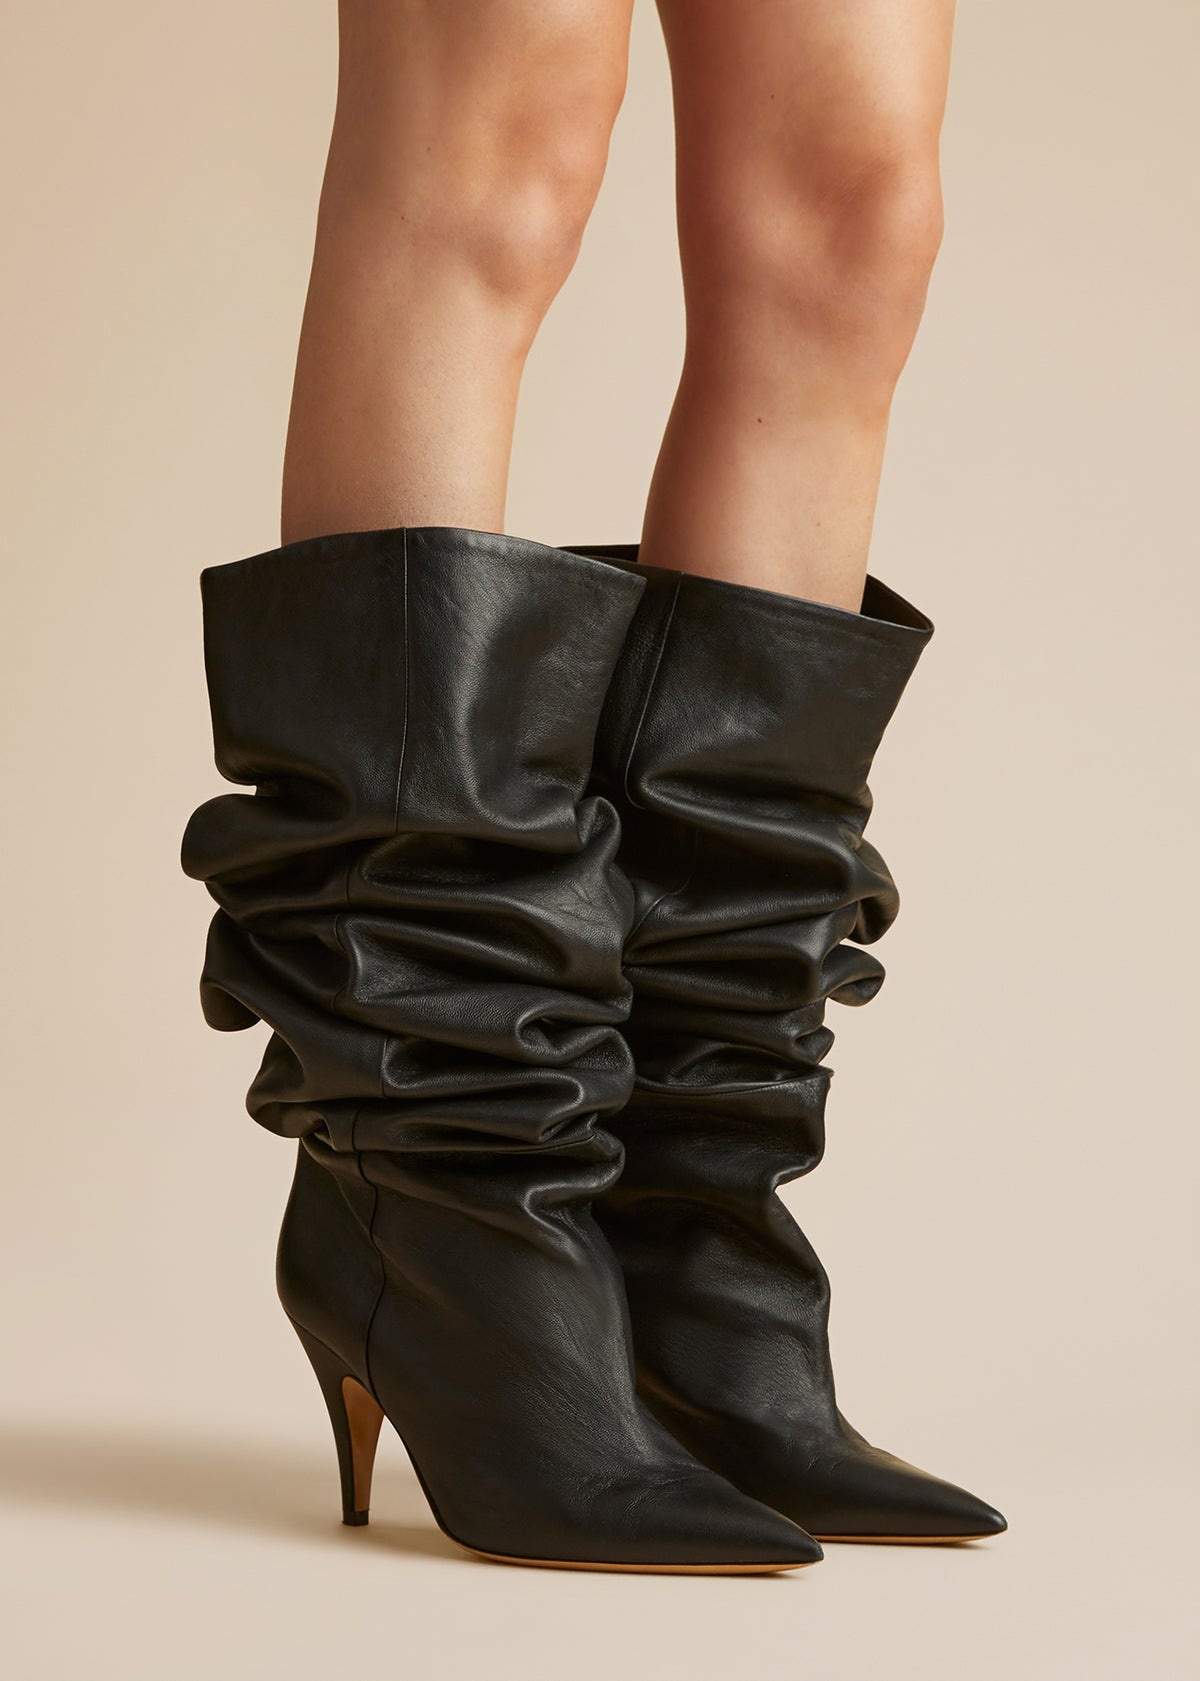 The River Knee-High Boot in Black Leather - 5